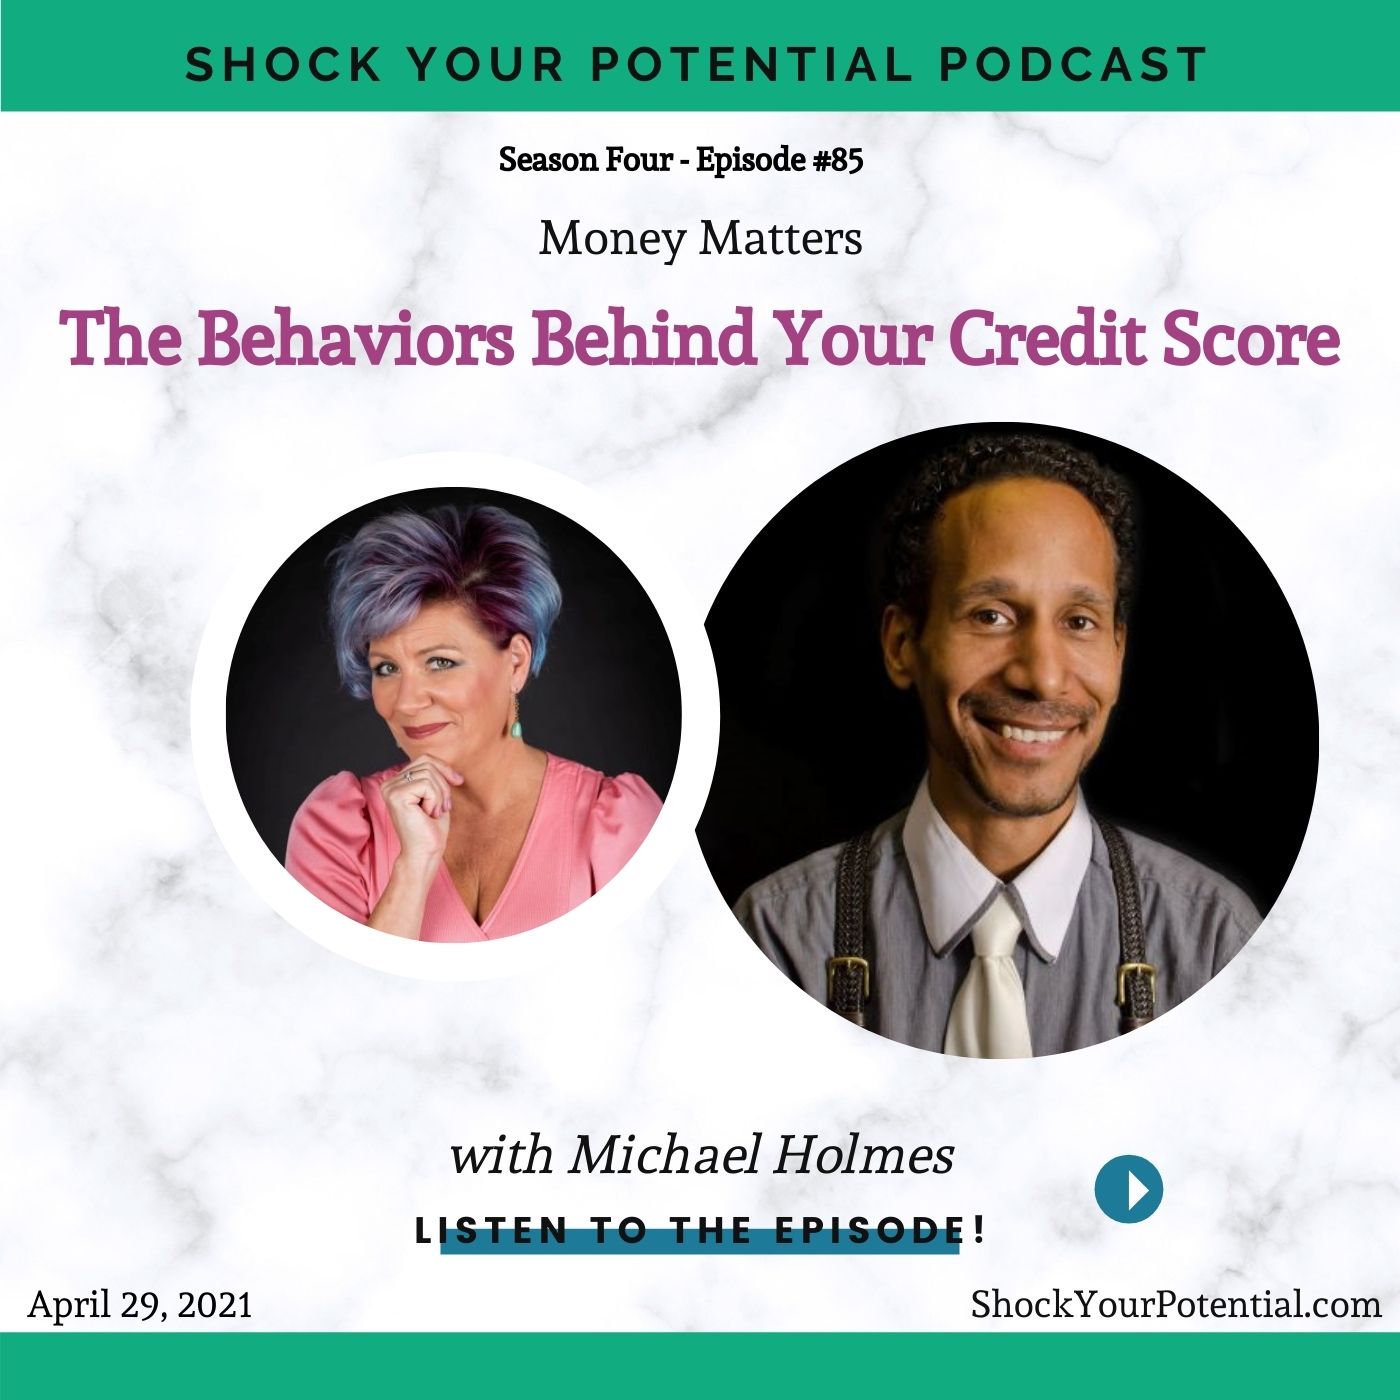 The Behaviors Behind Your Credit Score – Michael Holmes